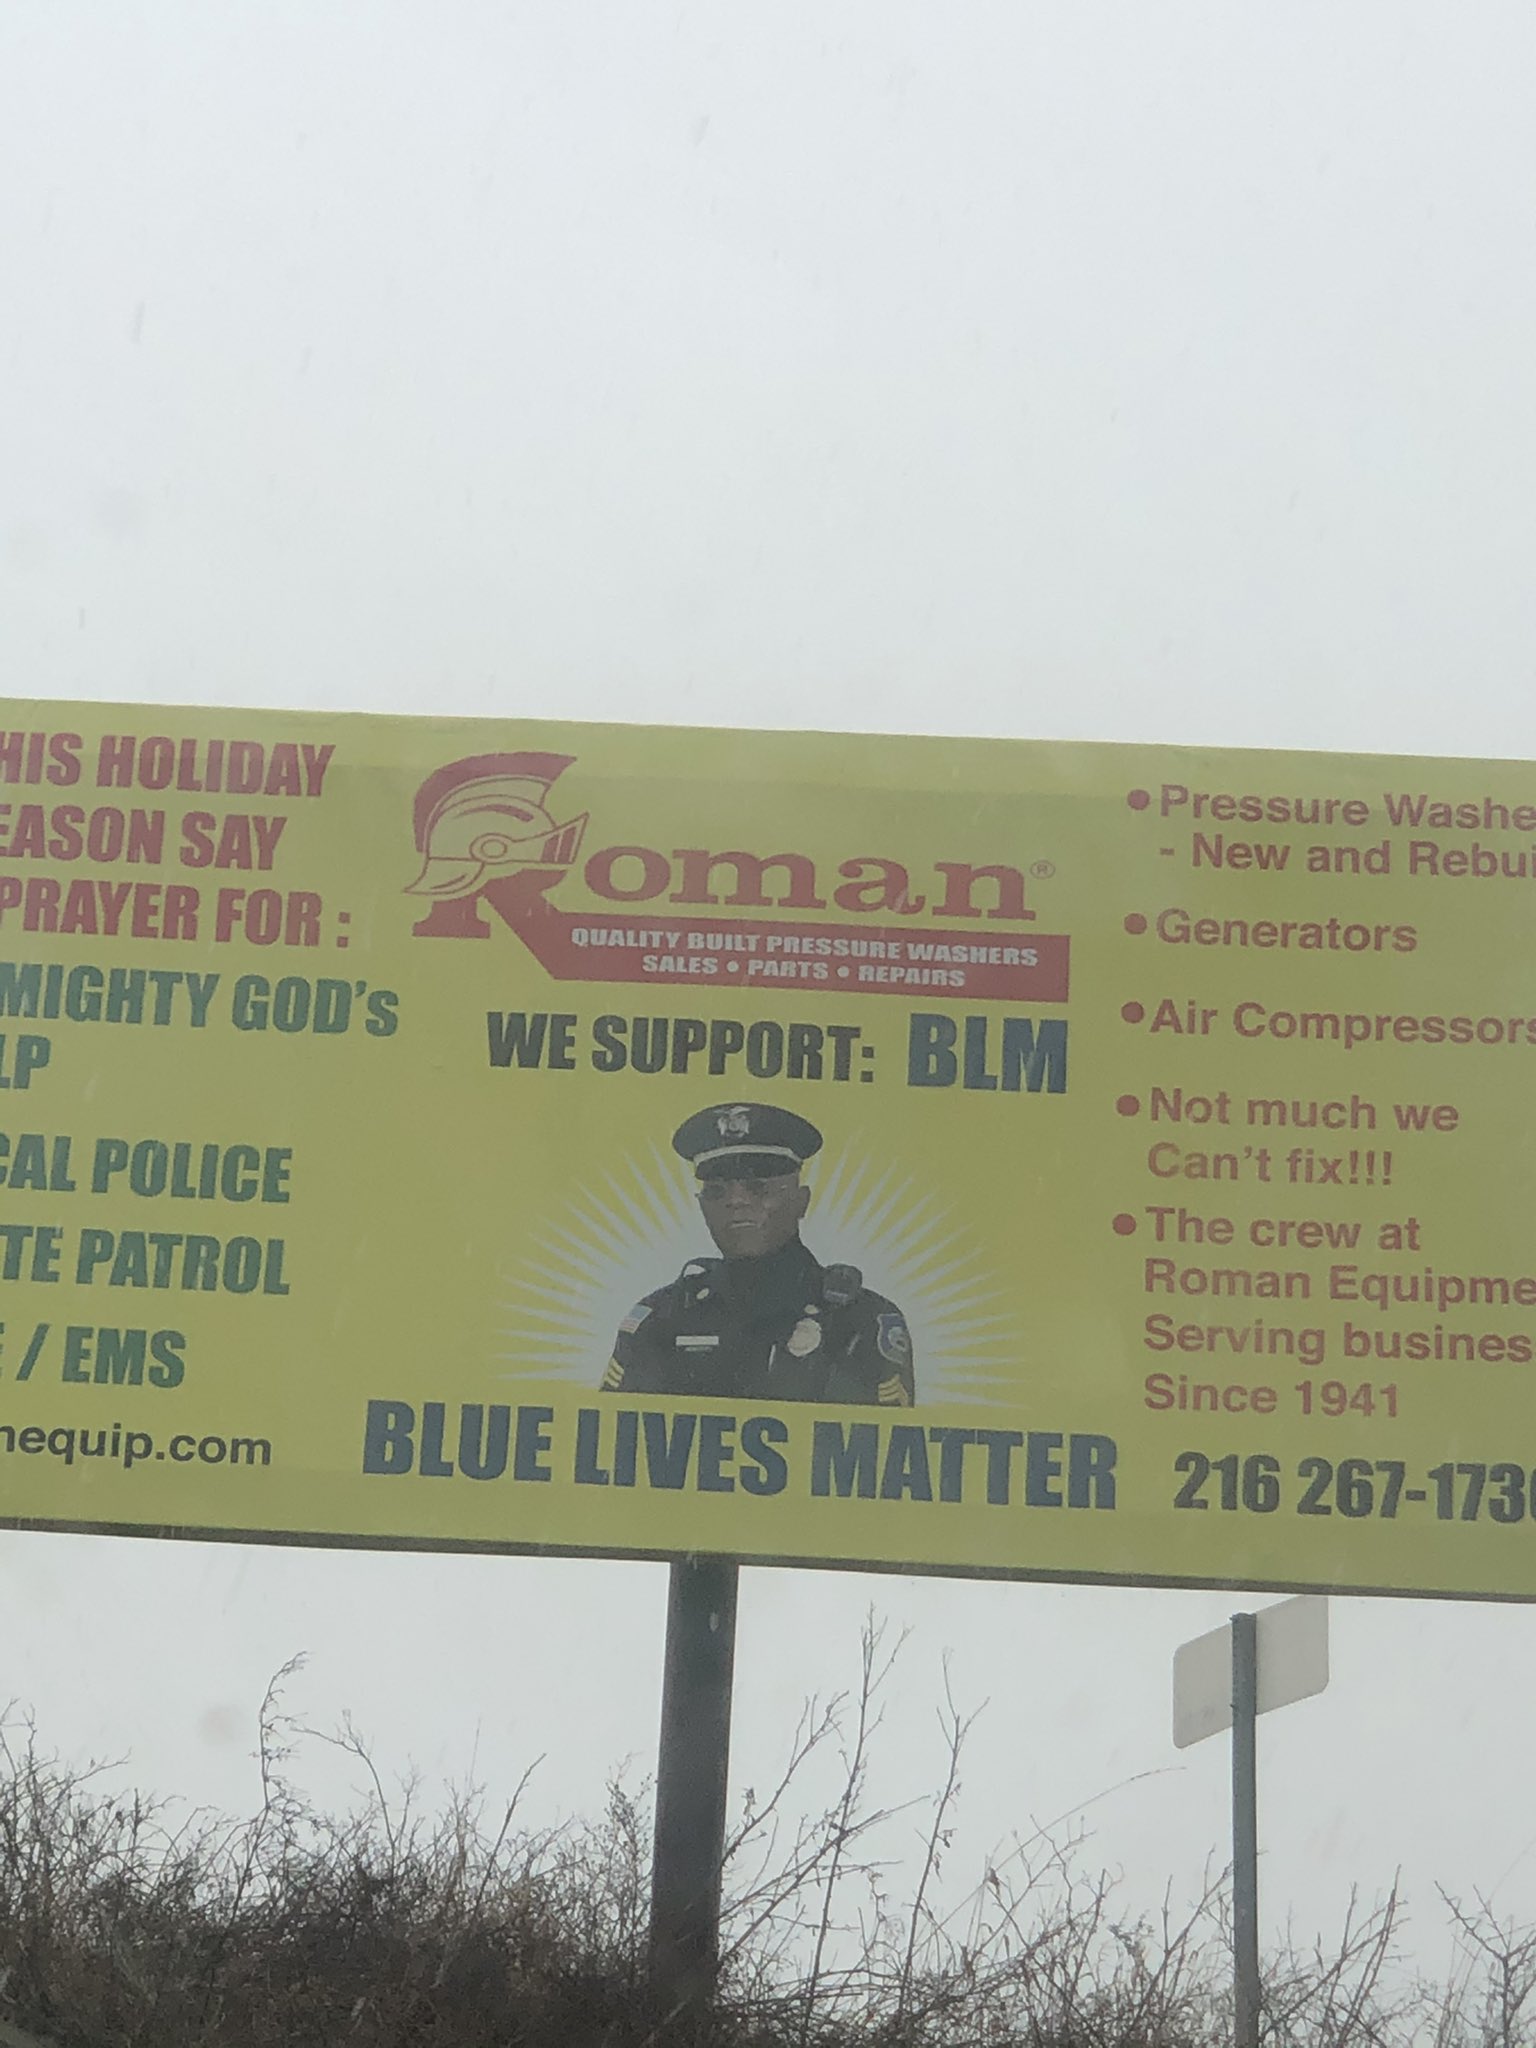 This is a picture of a billboard, on the billboard words write out "We Support: BLM" under these words is a picture of actor Samuel L. Jackson in a police officer uniform. Under the picture, words write out "Blue Lives Matter"